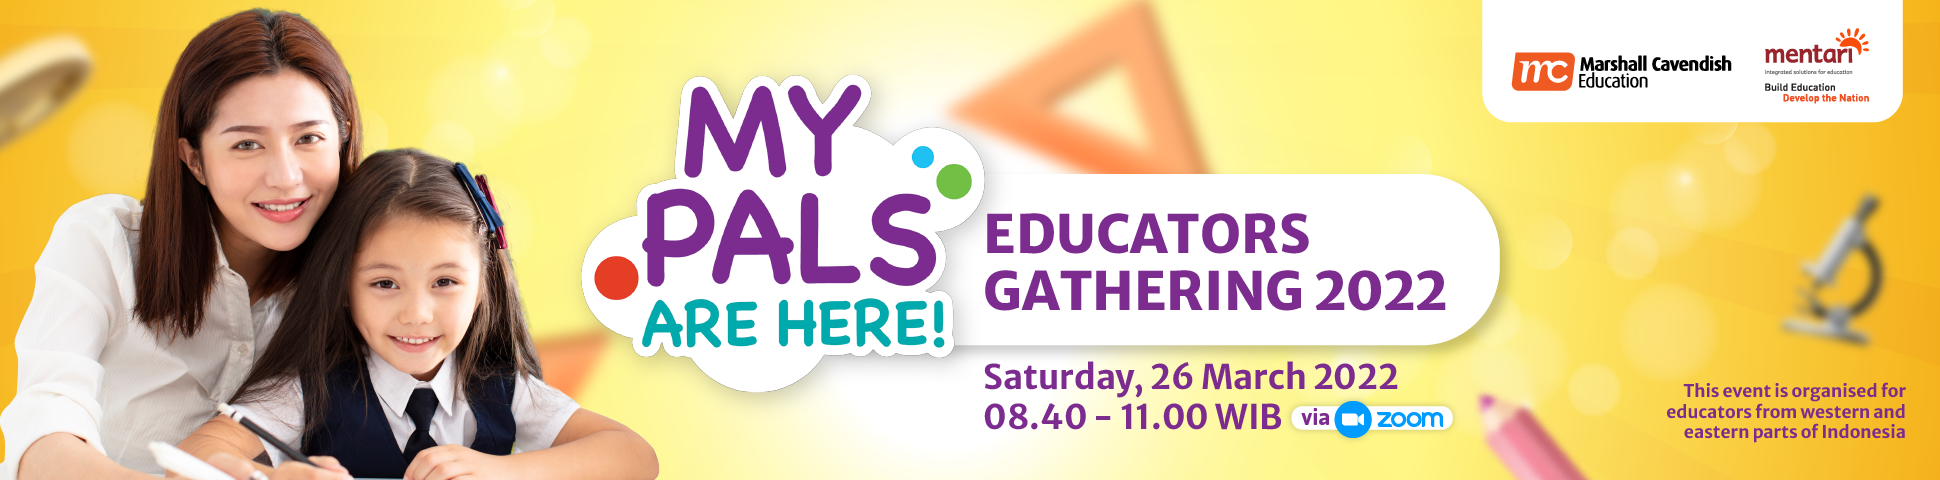 My Pals are Here! Educators Gathering - Maret 2022